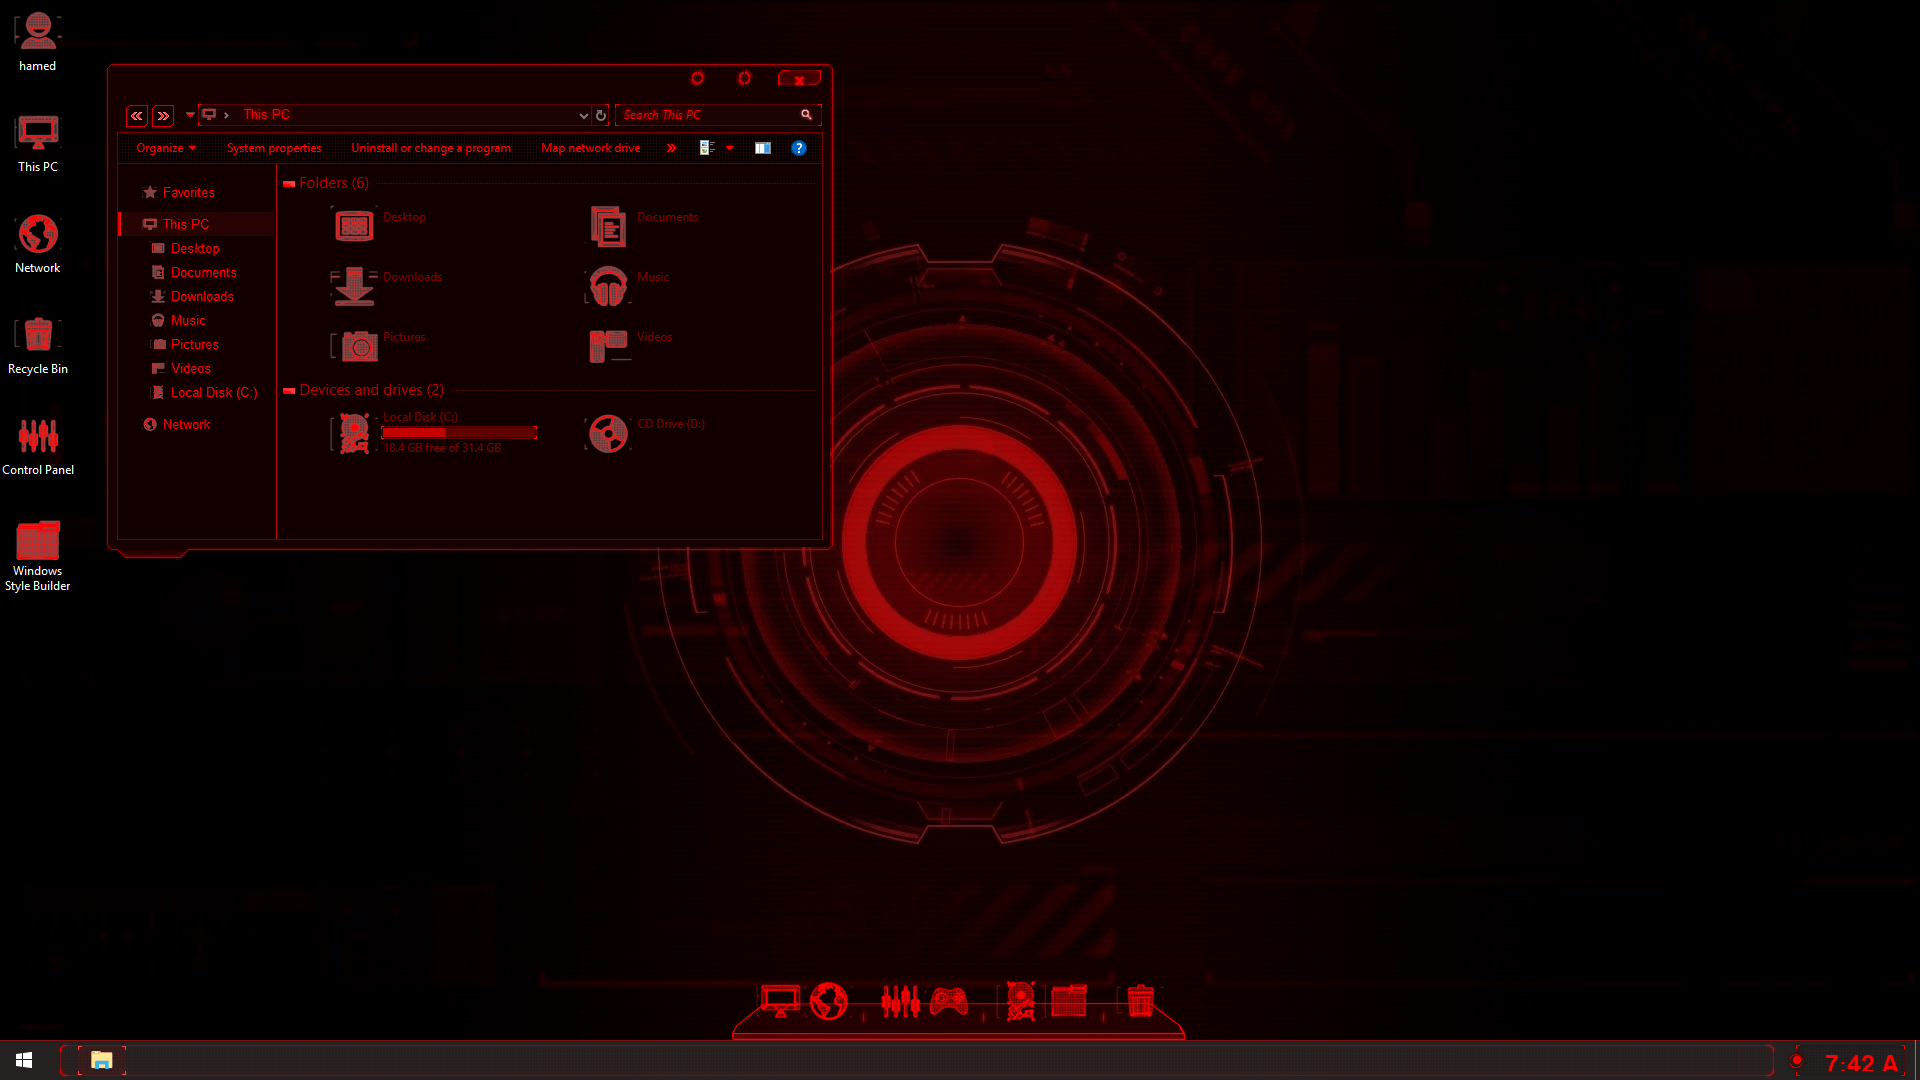 Jarvis Red SkinPack for Windows 7\\10 19H1|19H2|20H1 - Skin Pack Theme  for Windows 11 & 10